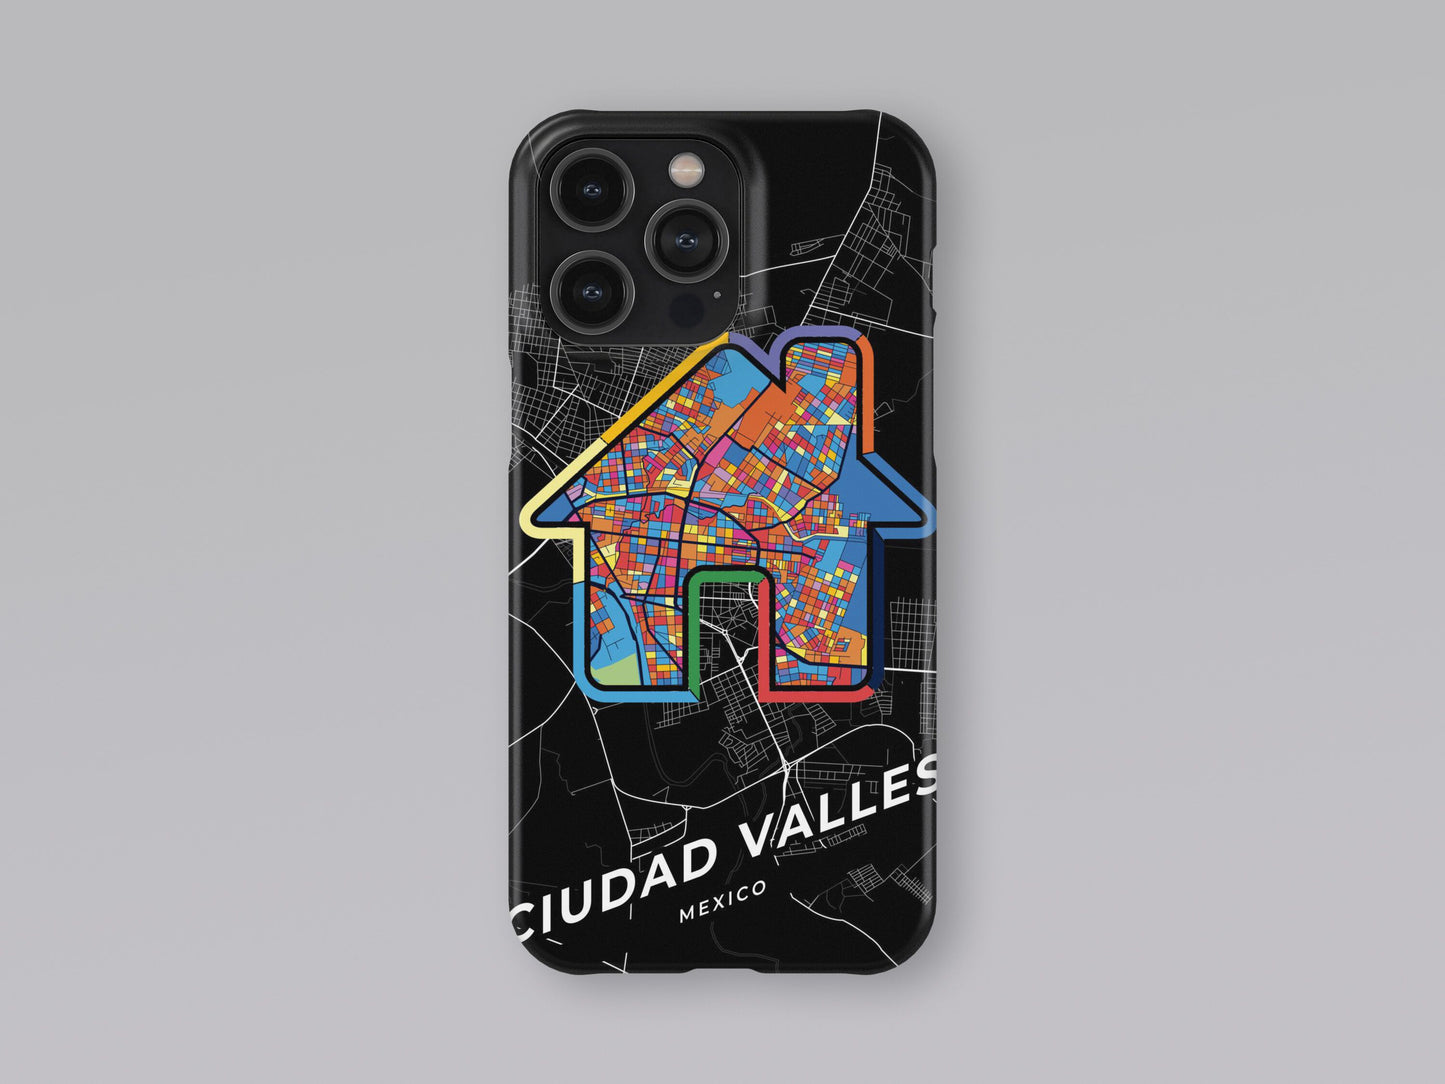 Ciudad Valles Mexico slim phone case with colorful icon. Birthday, wedding or housewarming gift. Couple match cases. 3